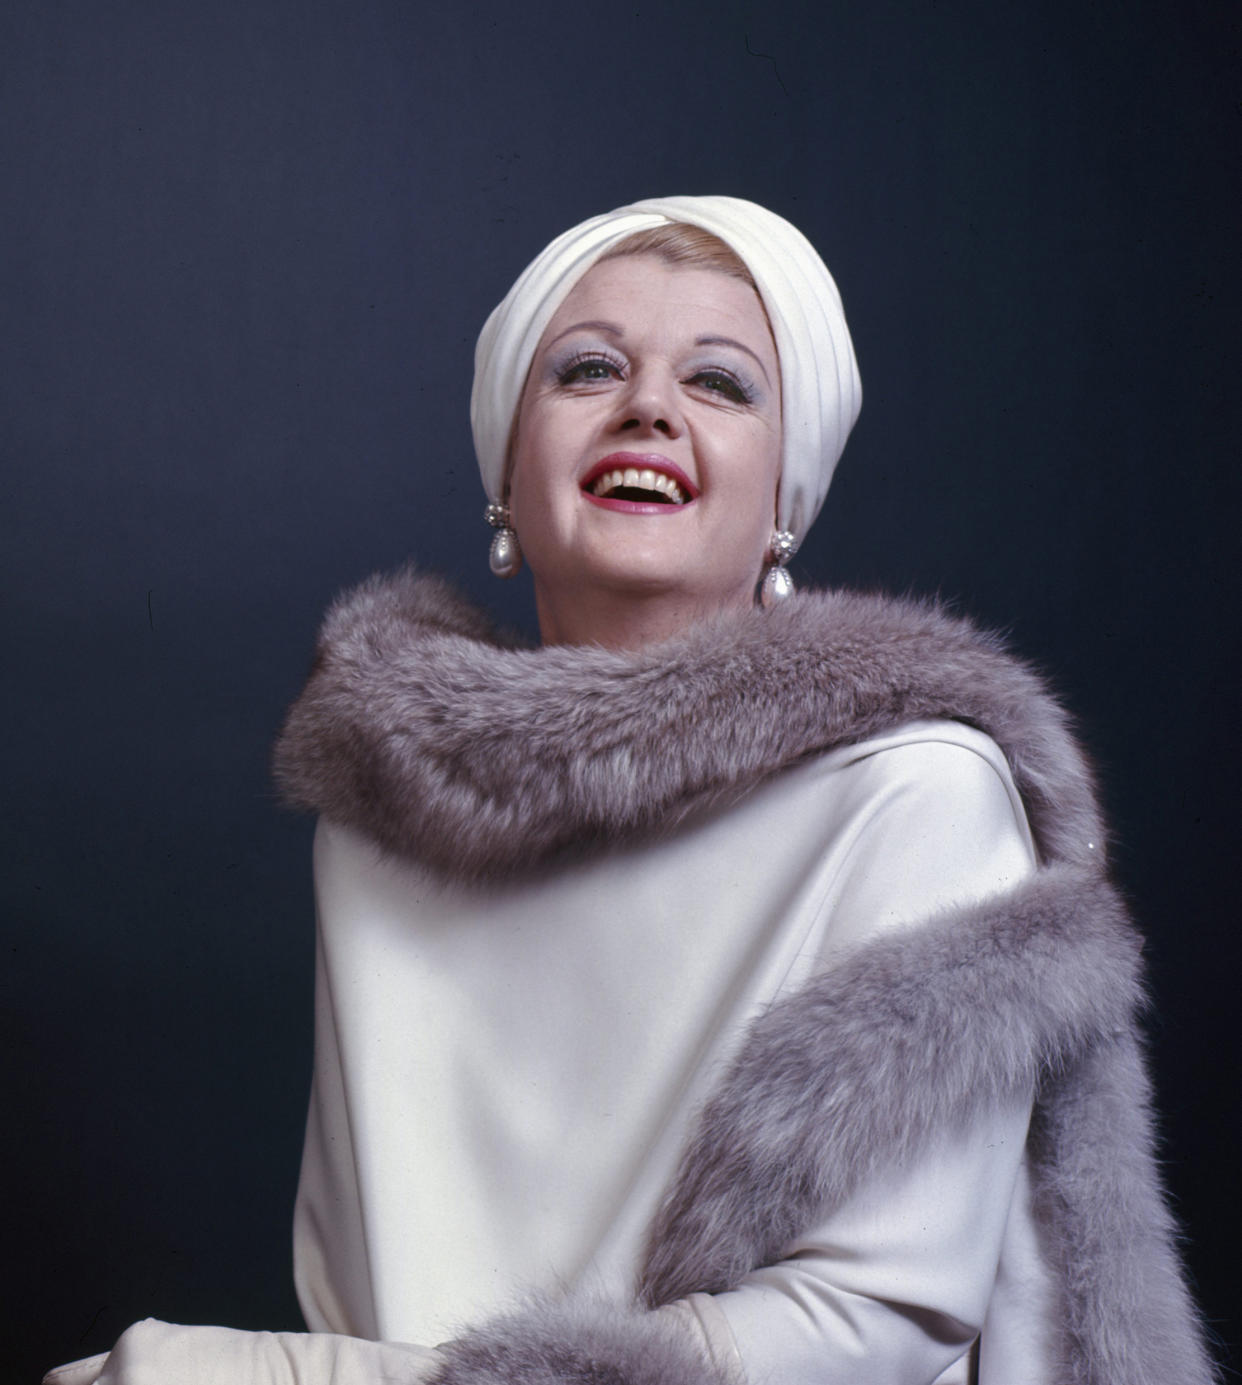 Angela Lansbury starring in the Broadway musical 'Mame' in 1966. (Jack Mitchell / Getty Images)